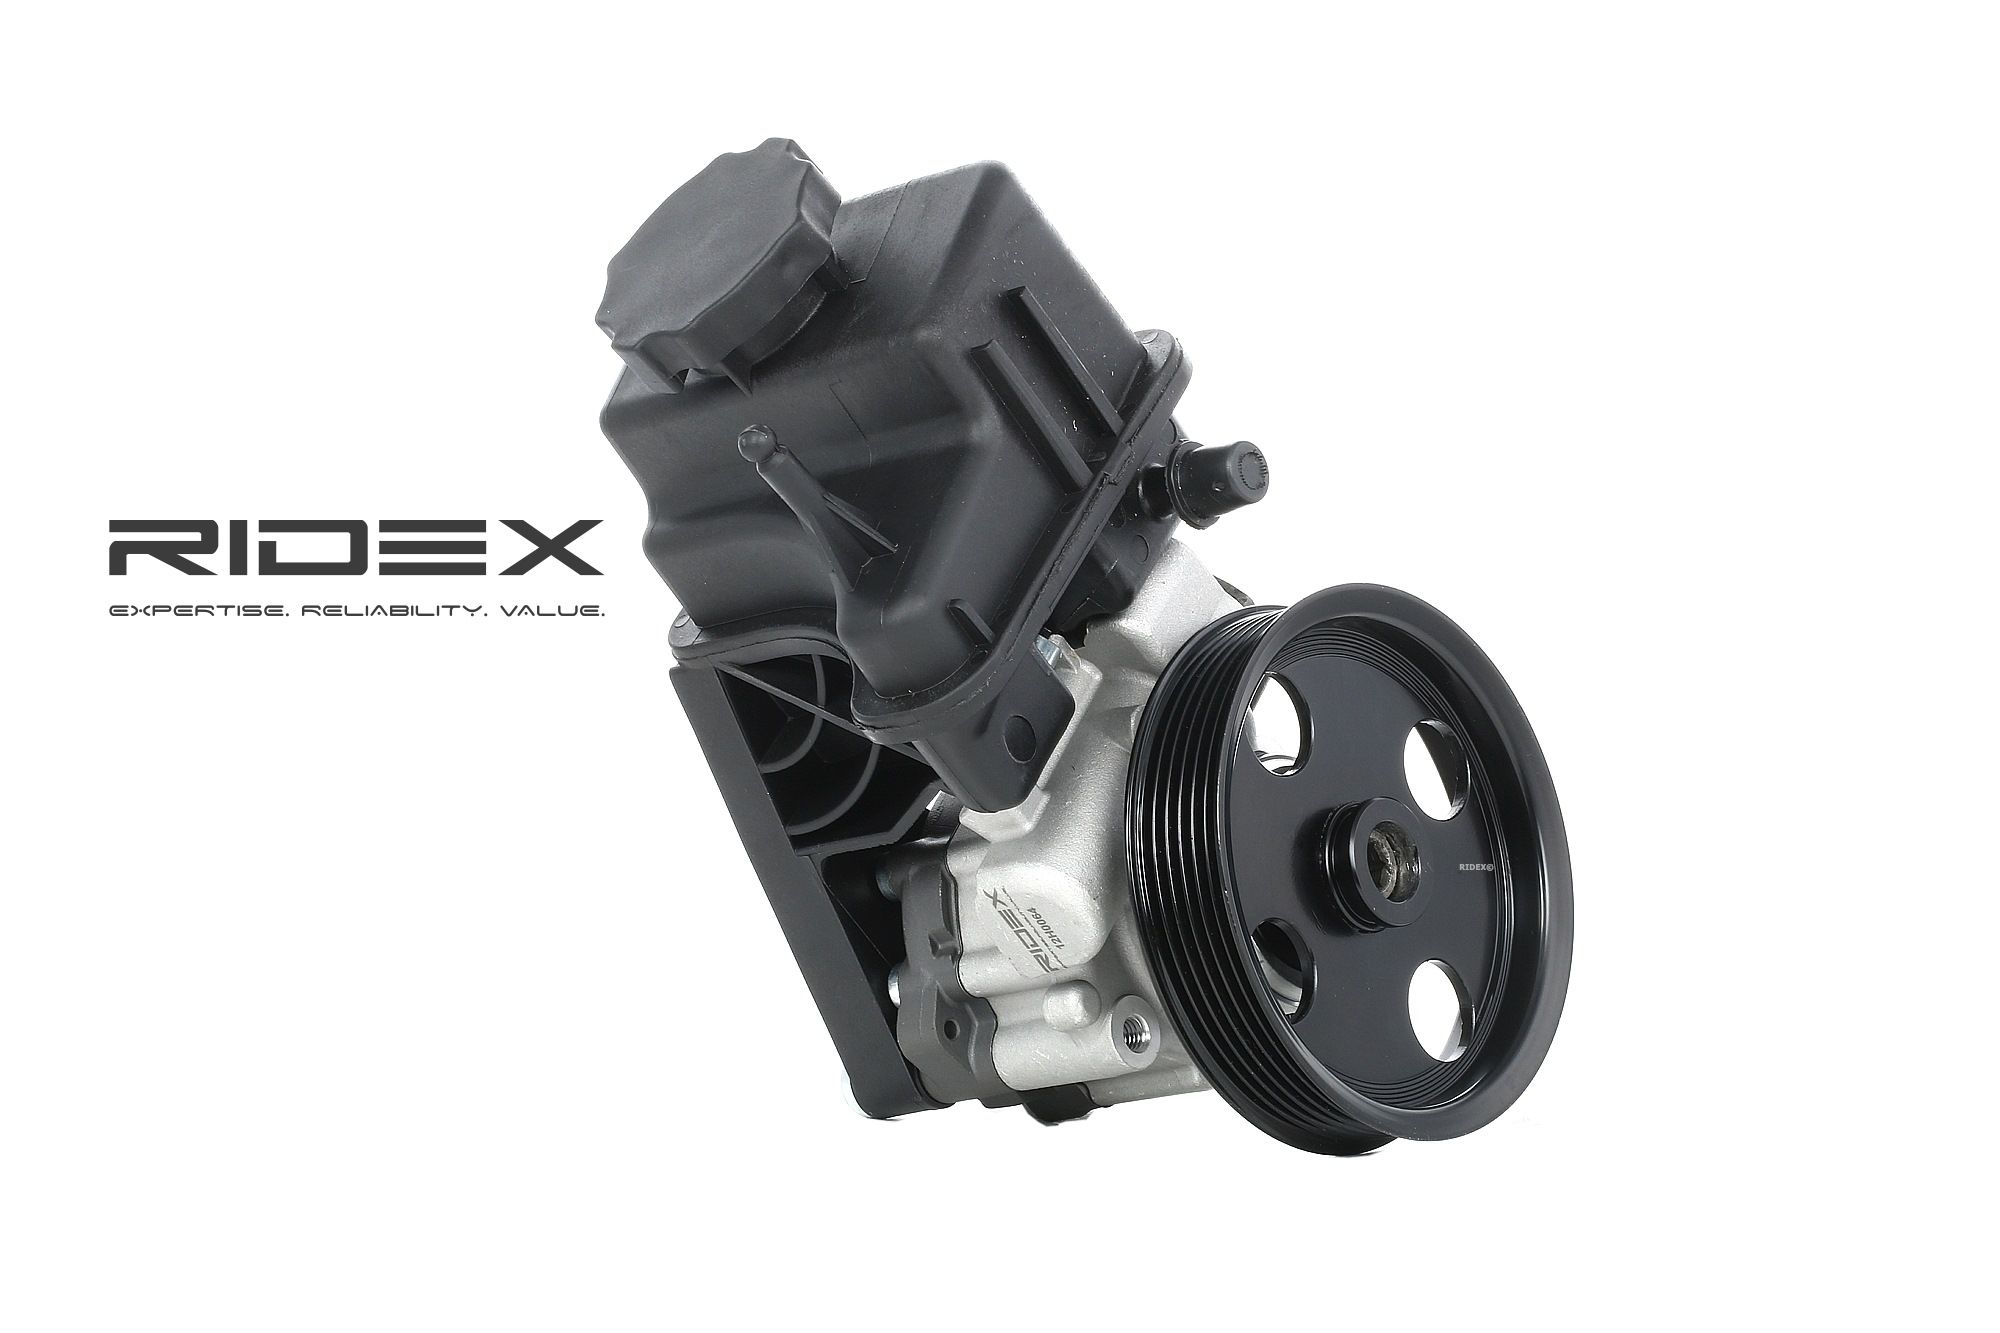 Image of RIDEX Power Steering Pump MERCEDES-BENZ 12H0064 0064661701,006466170180,0064667801 Steering Pump,EHPS,EHPS Pump,Hydraulic Pump, steering system